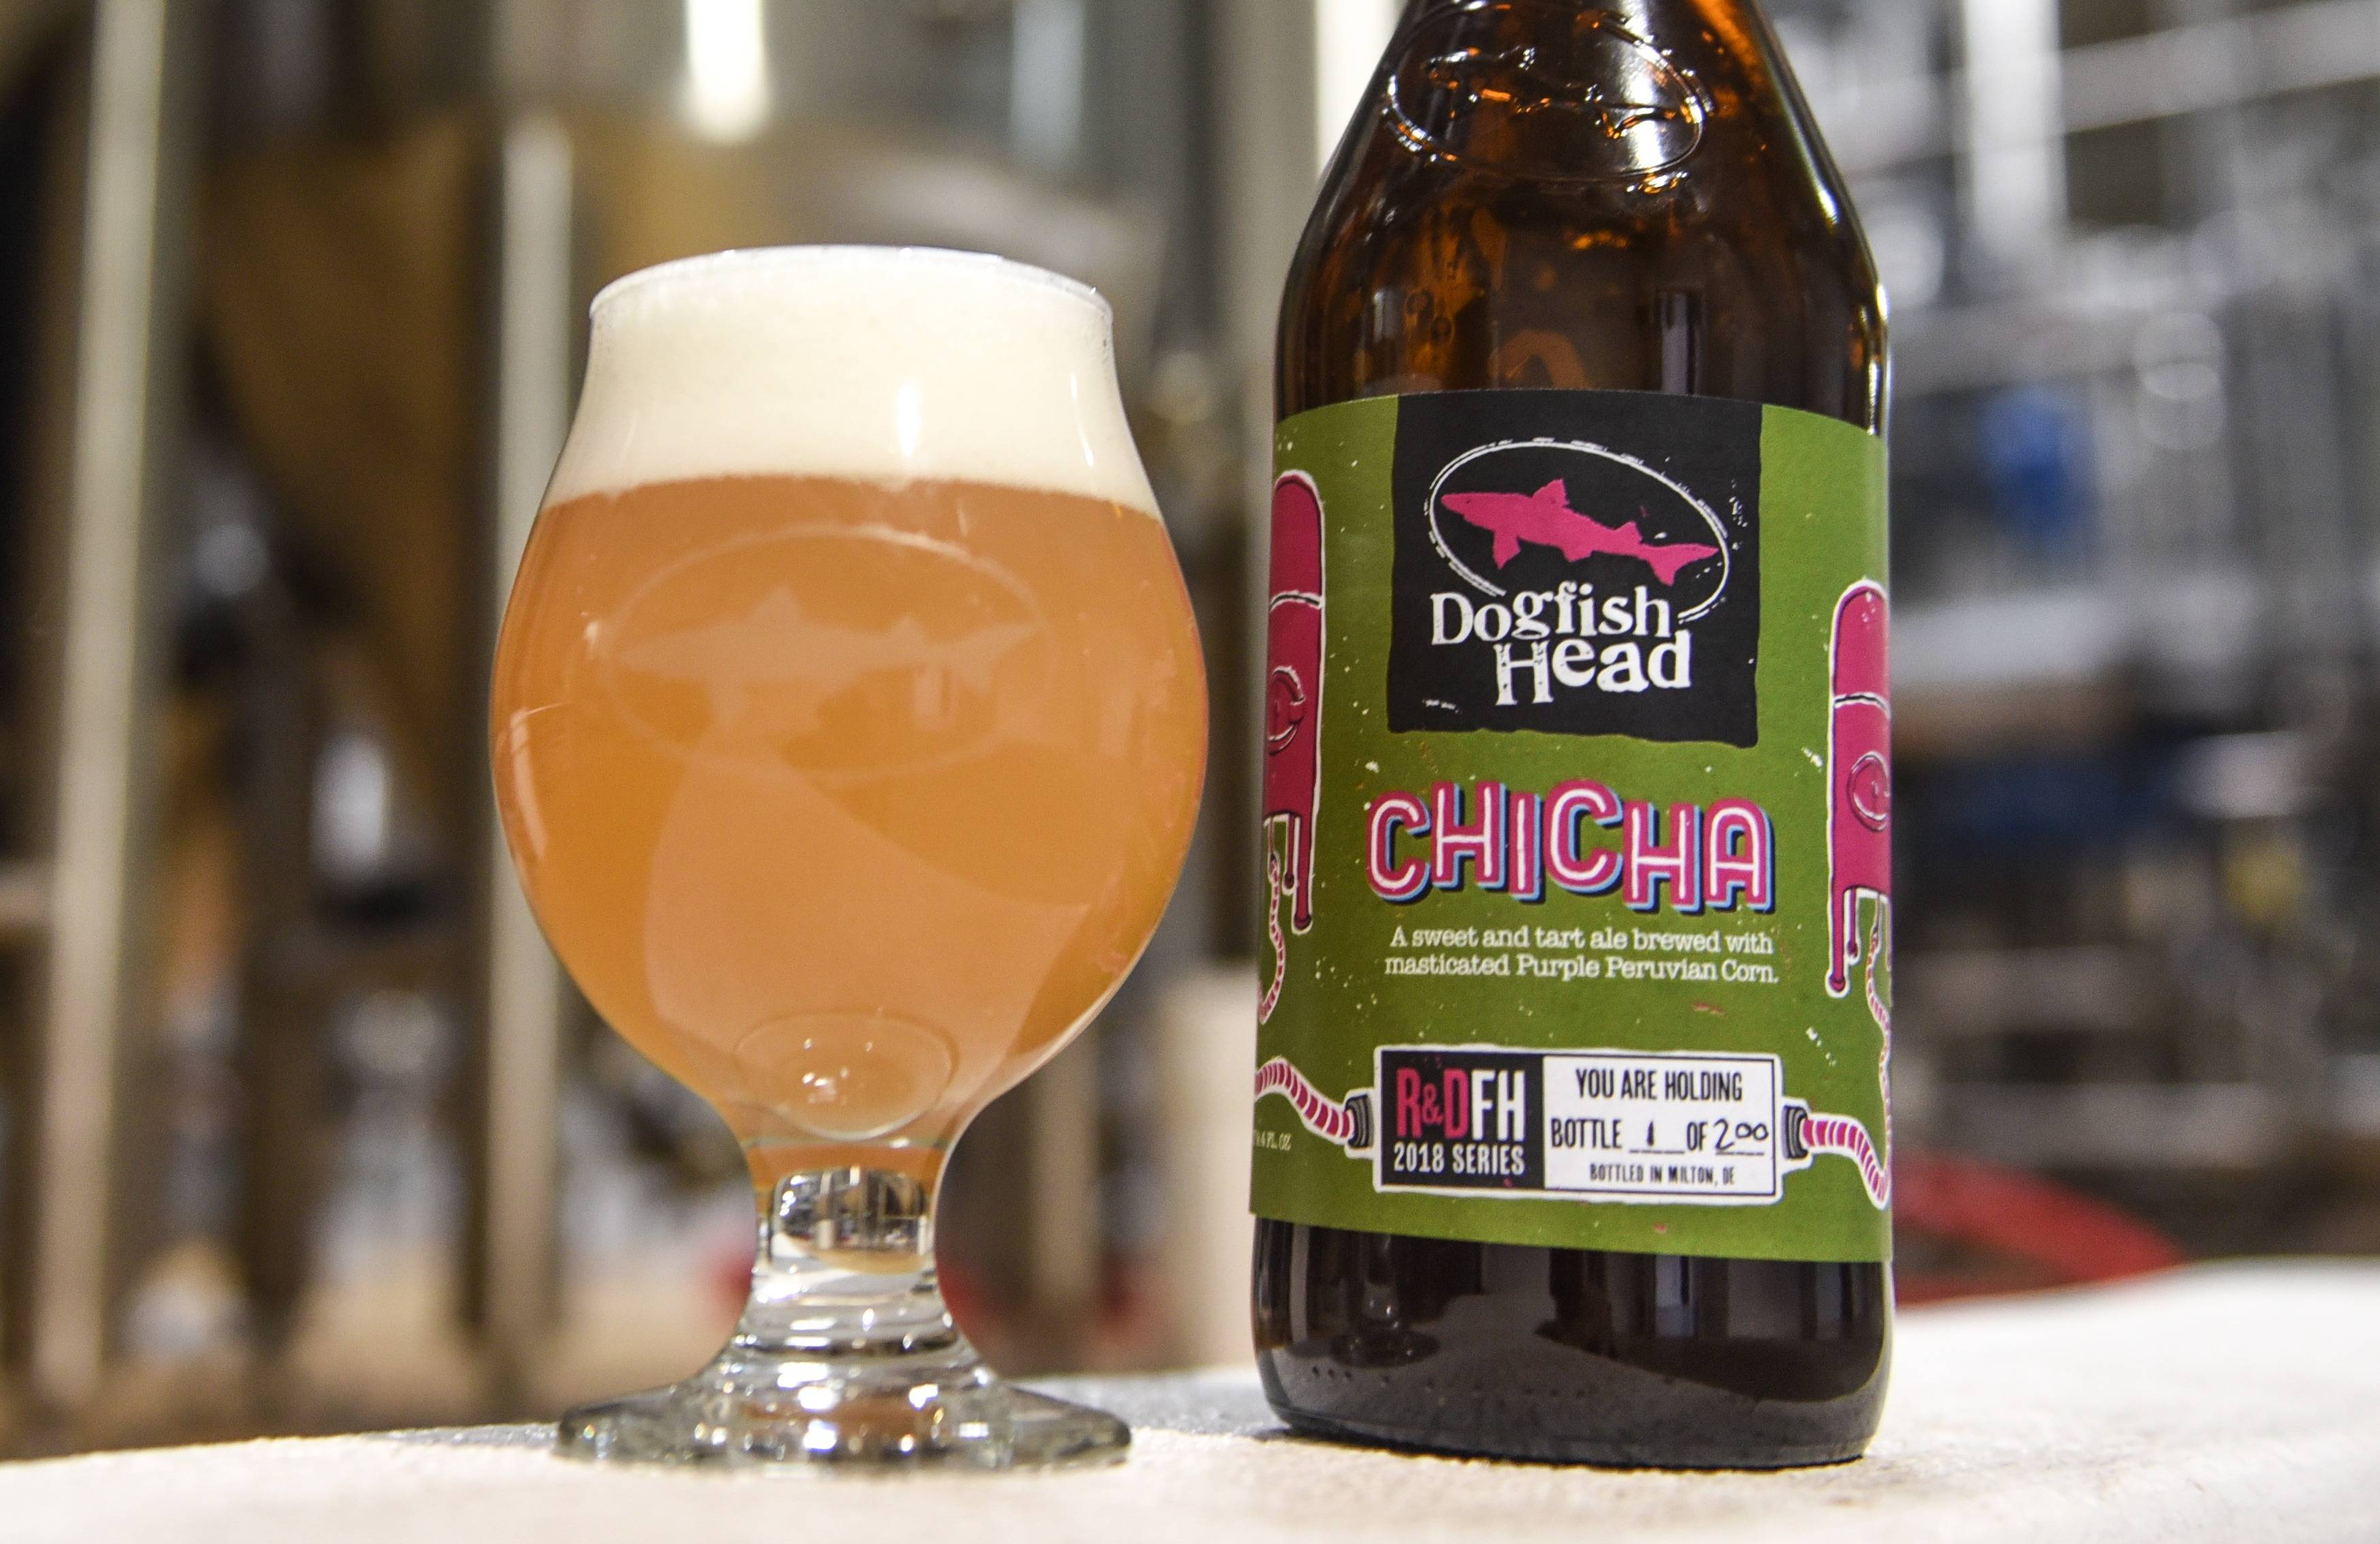 Chicha | The Beer of South America - PorchDrinking.com